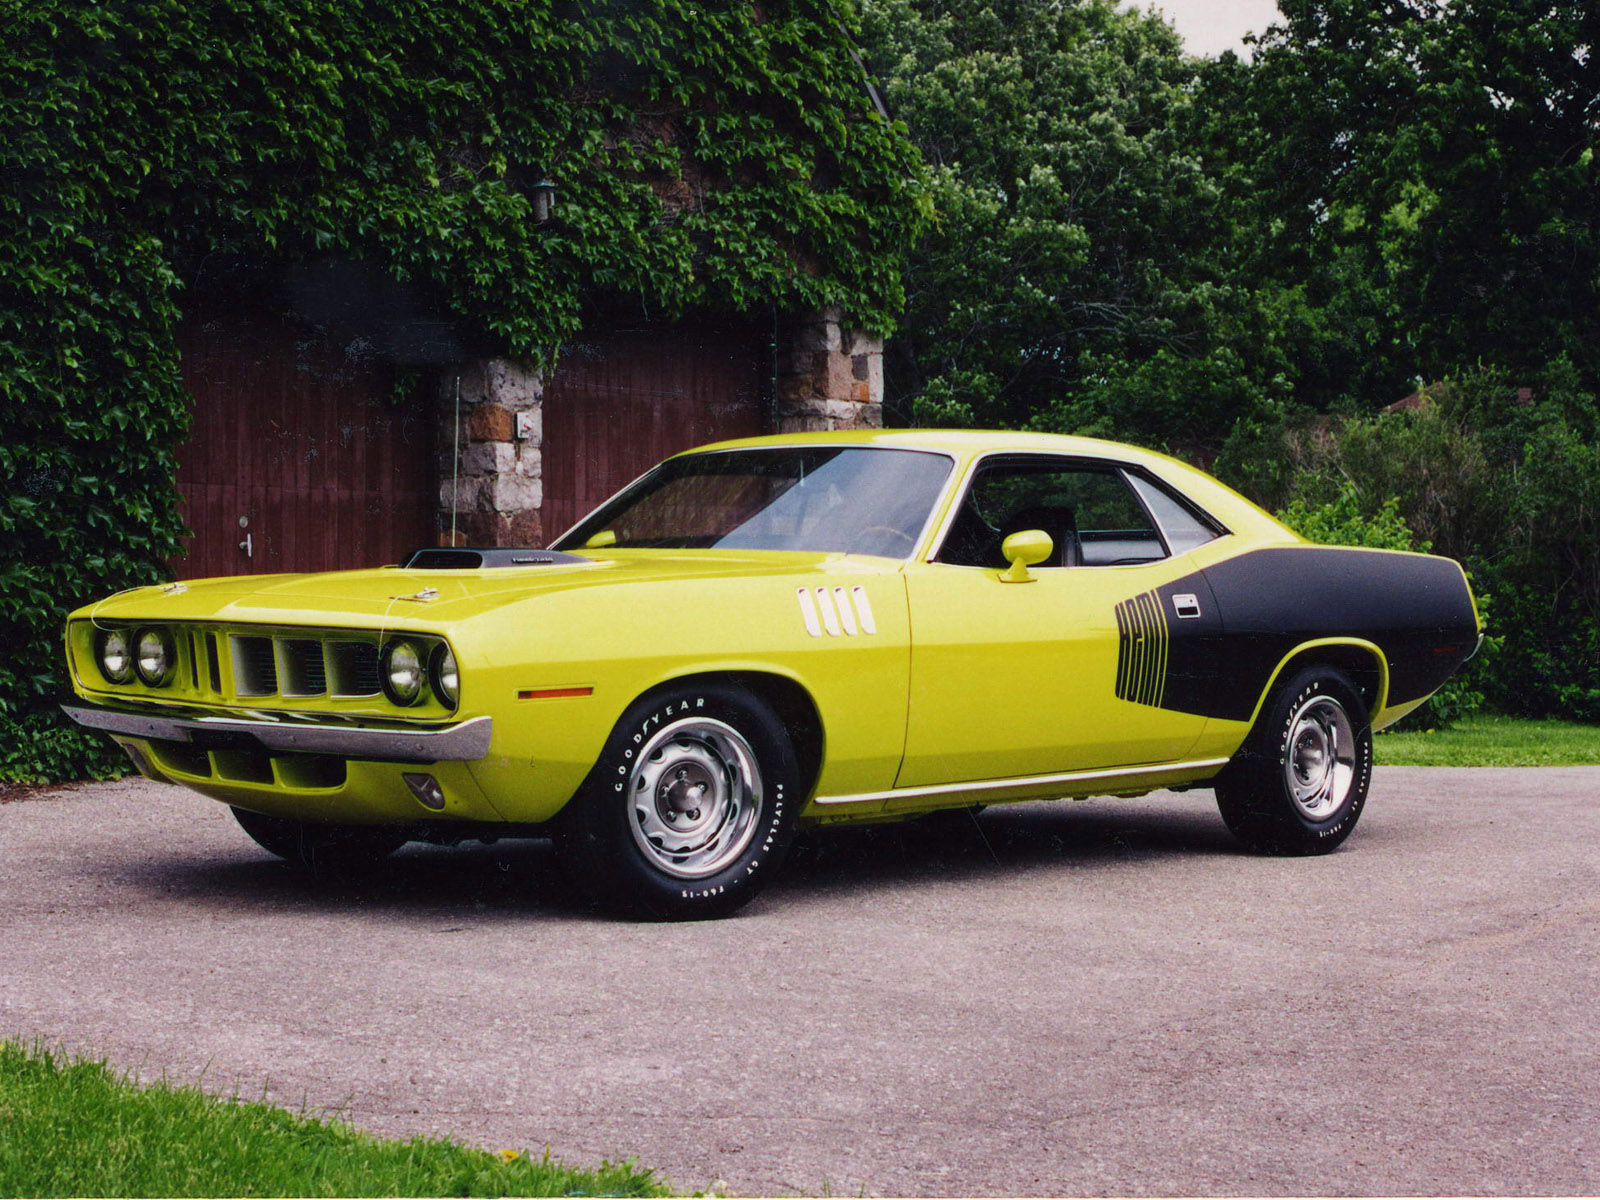 A pretty sweet muscle car, the Plymouth Barracuda. With a 426 Cubic Inch Hemi motor, this thing cranked out 425hp.